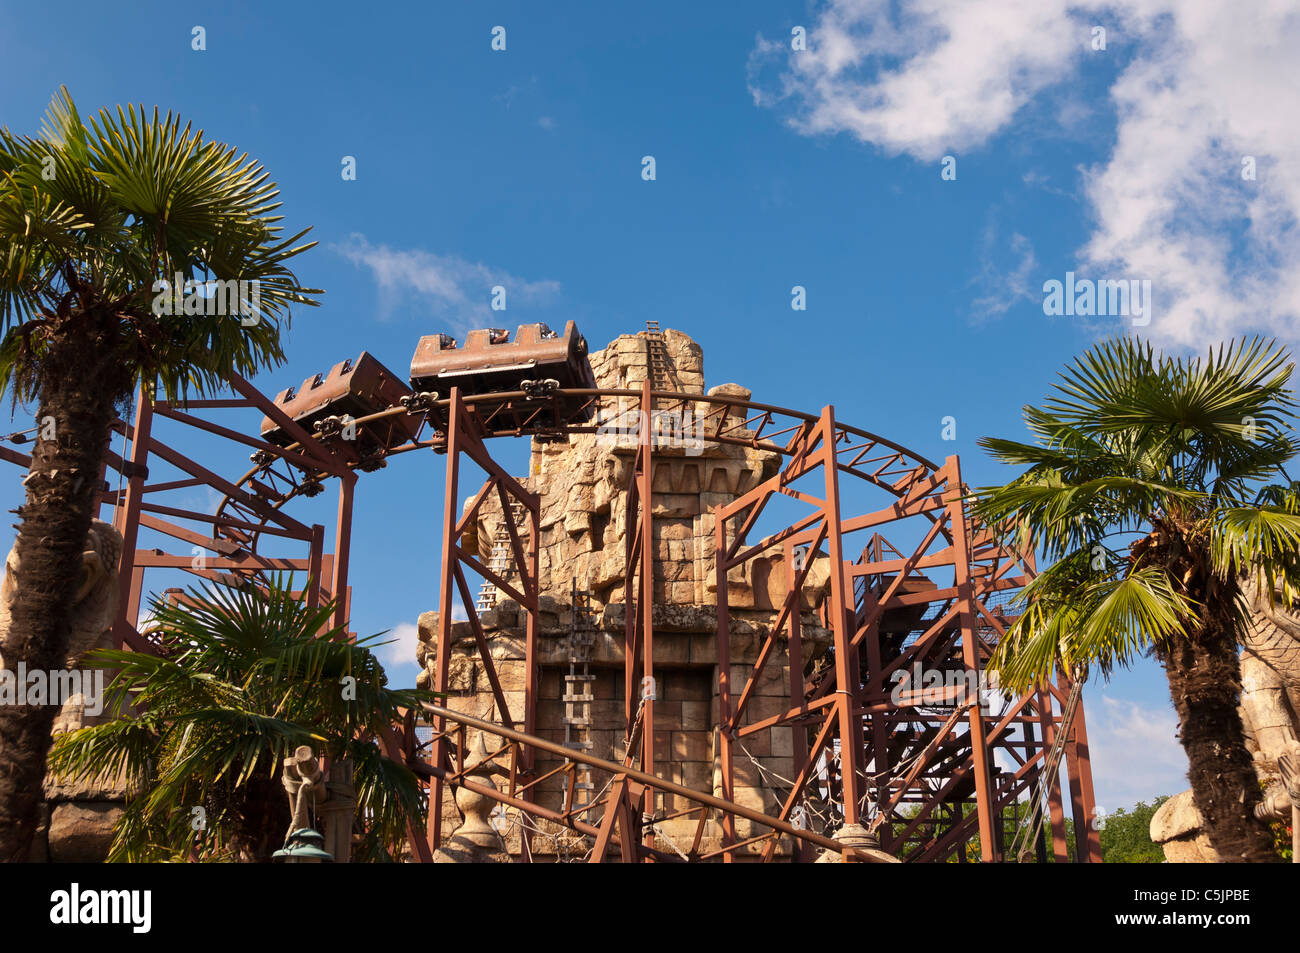 The Indiana Jones and the Temple of Peril roller coaster ride at Disneyland Paris in France Stock Photo